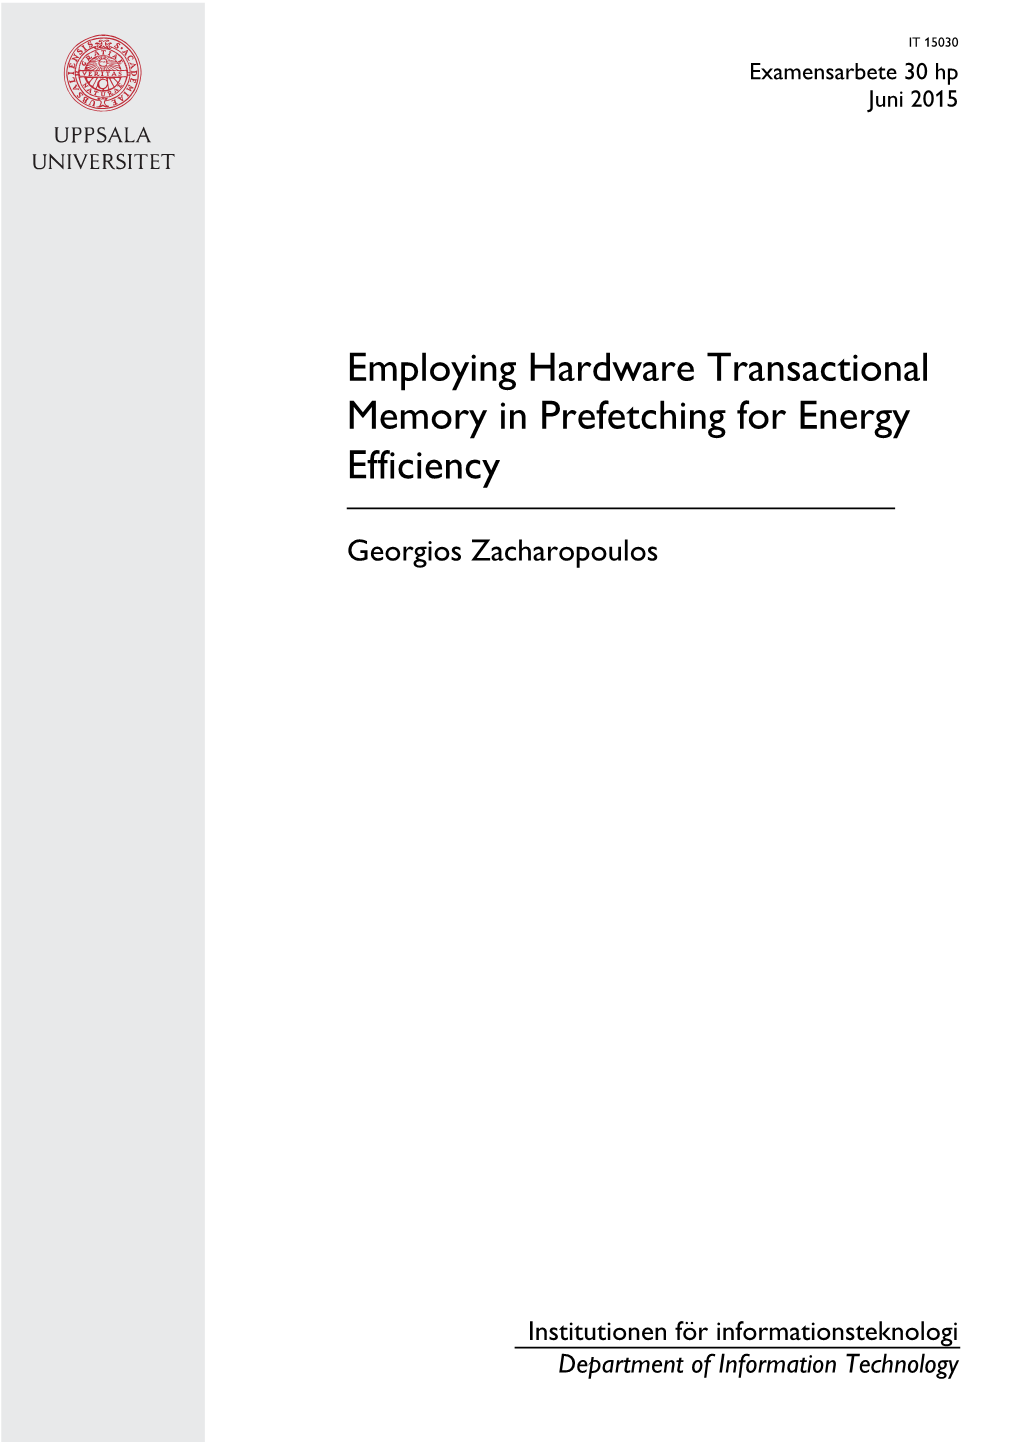 Employing Hardware Transactional Memory in Prefetching for Energy Efficiency